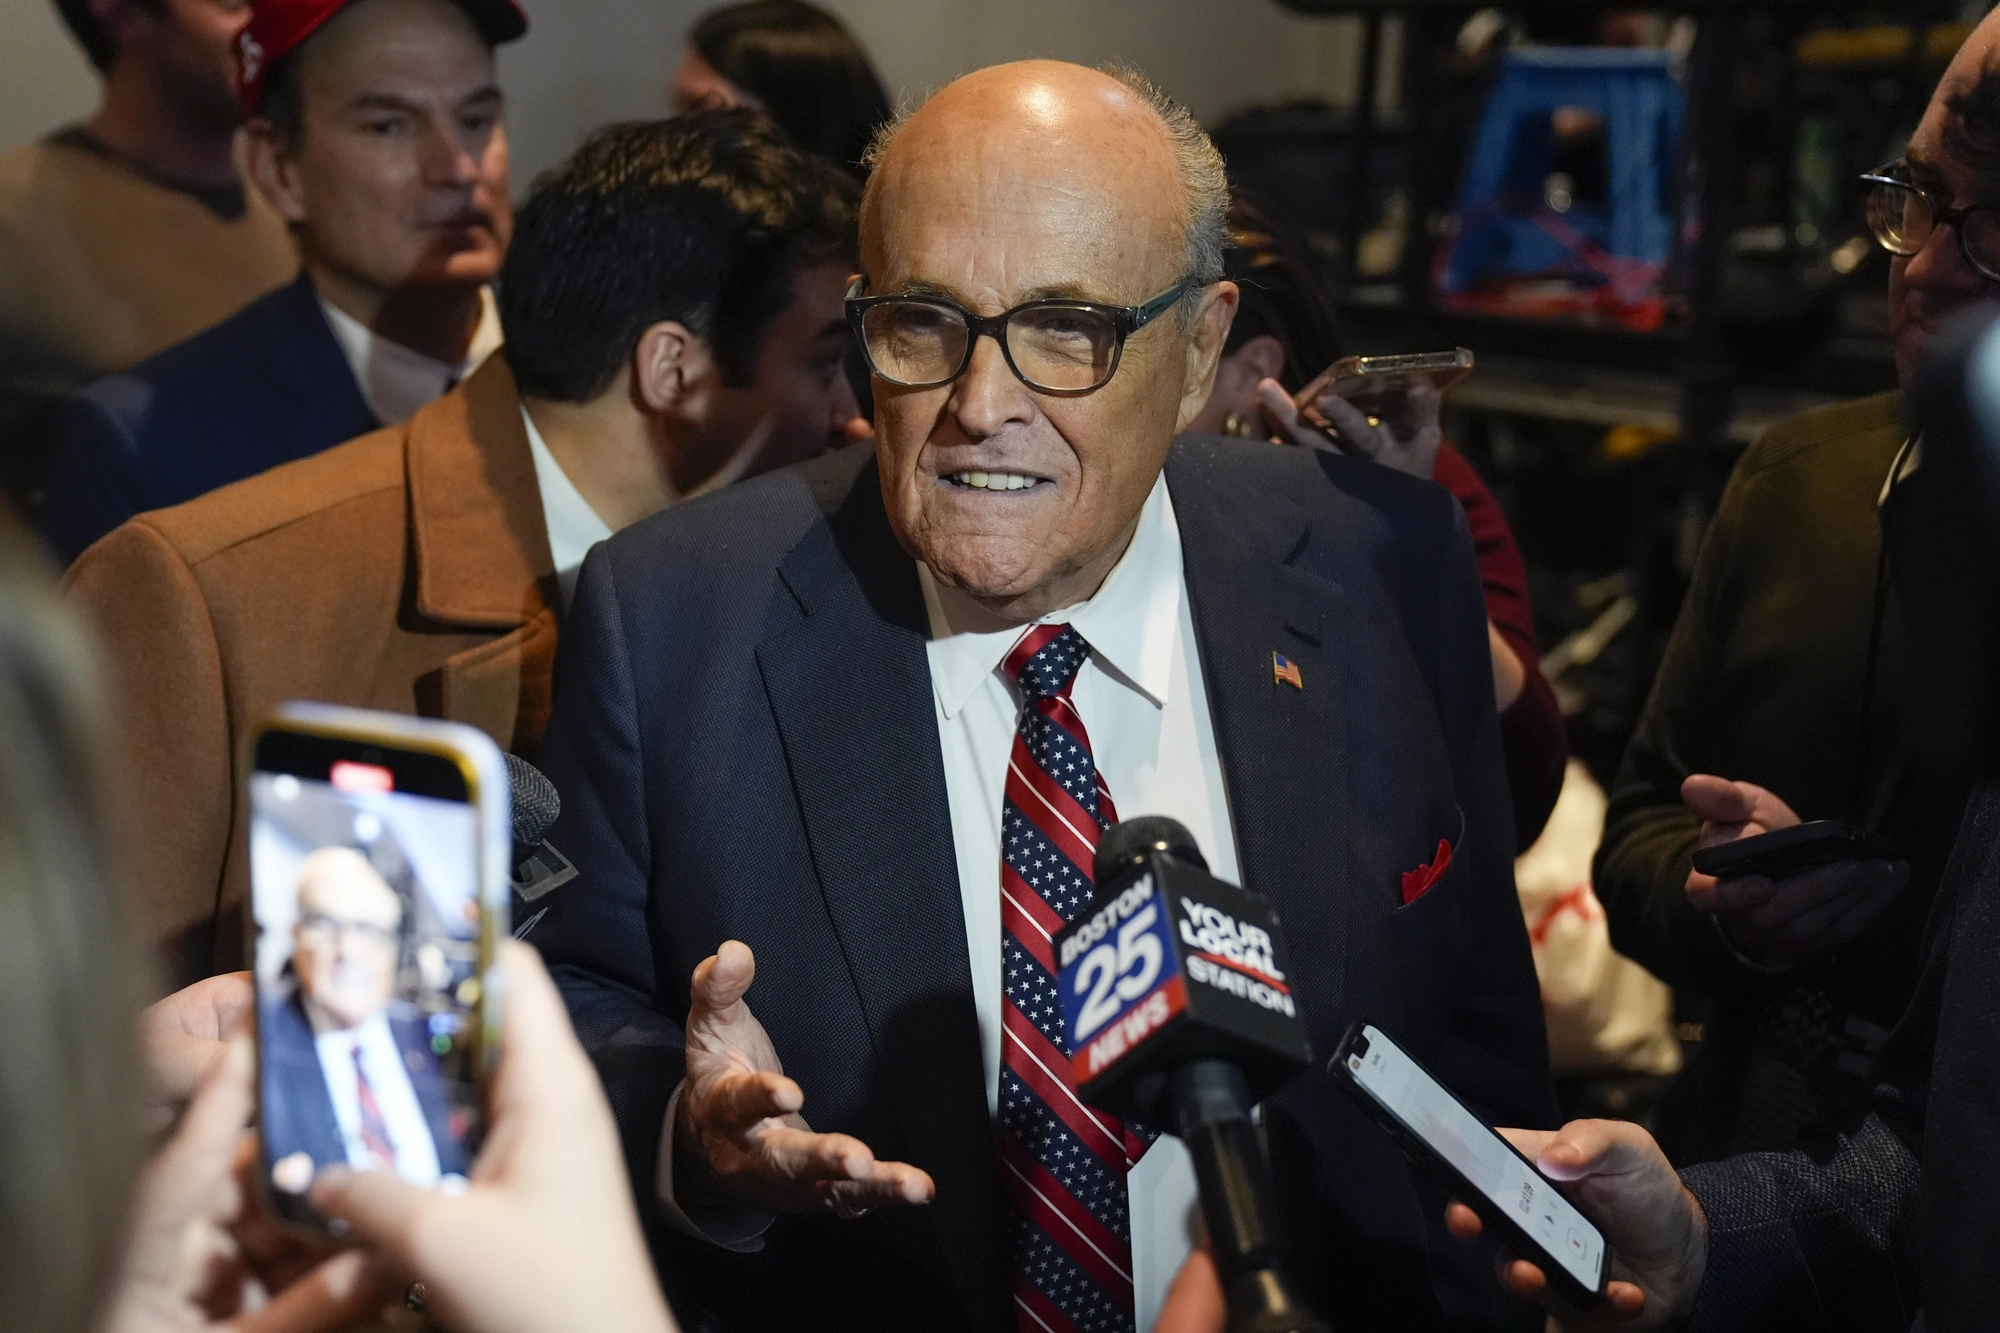 Arizona grand jury indicts Meadows, Giuliani, other Trump allies for 2020 election interference